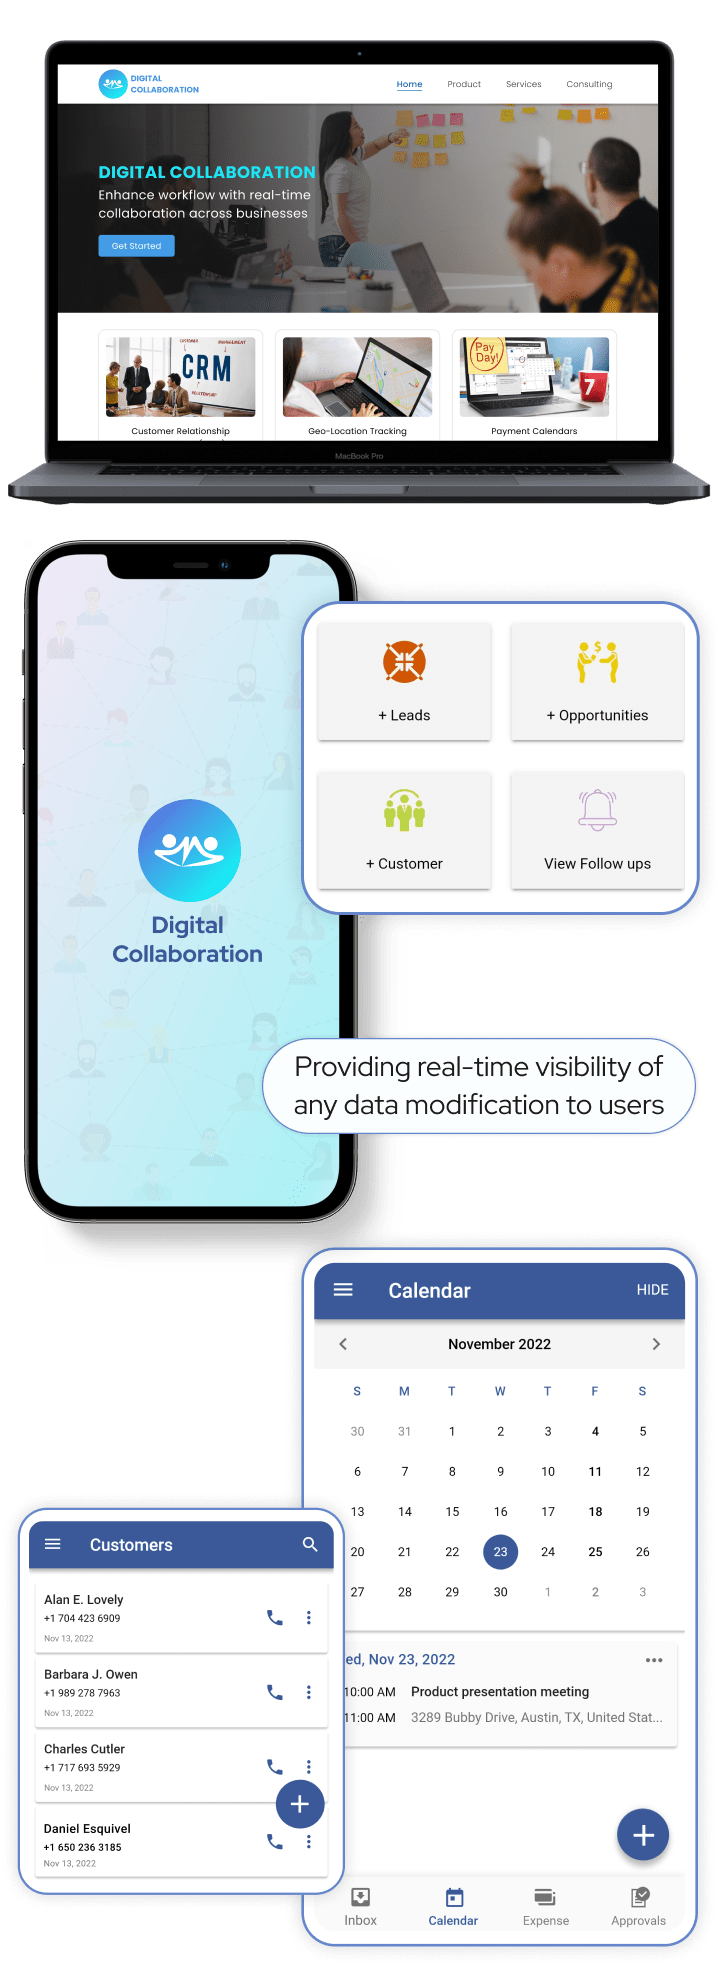 Digital Collaboration overview